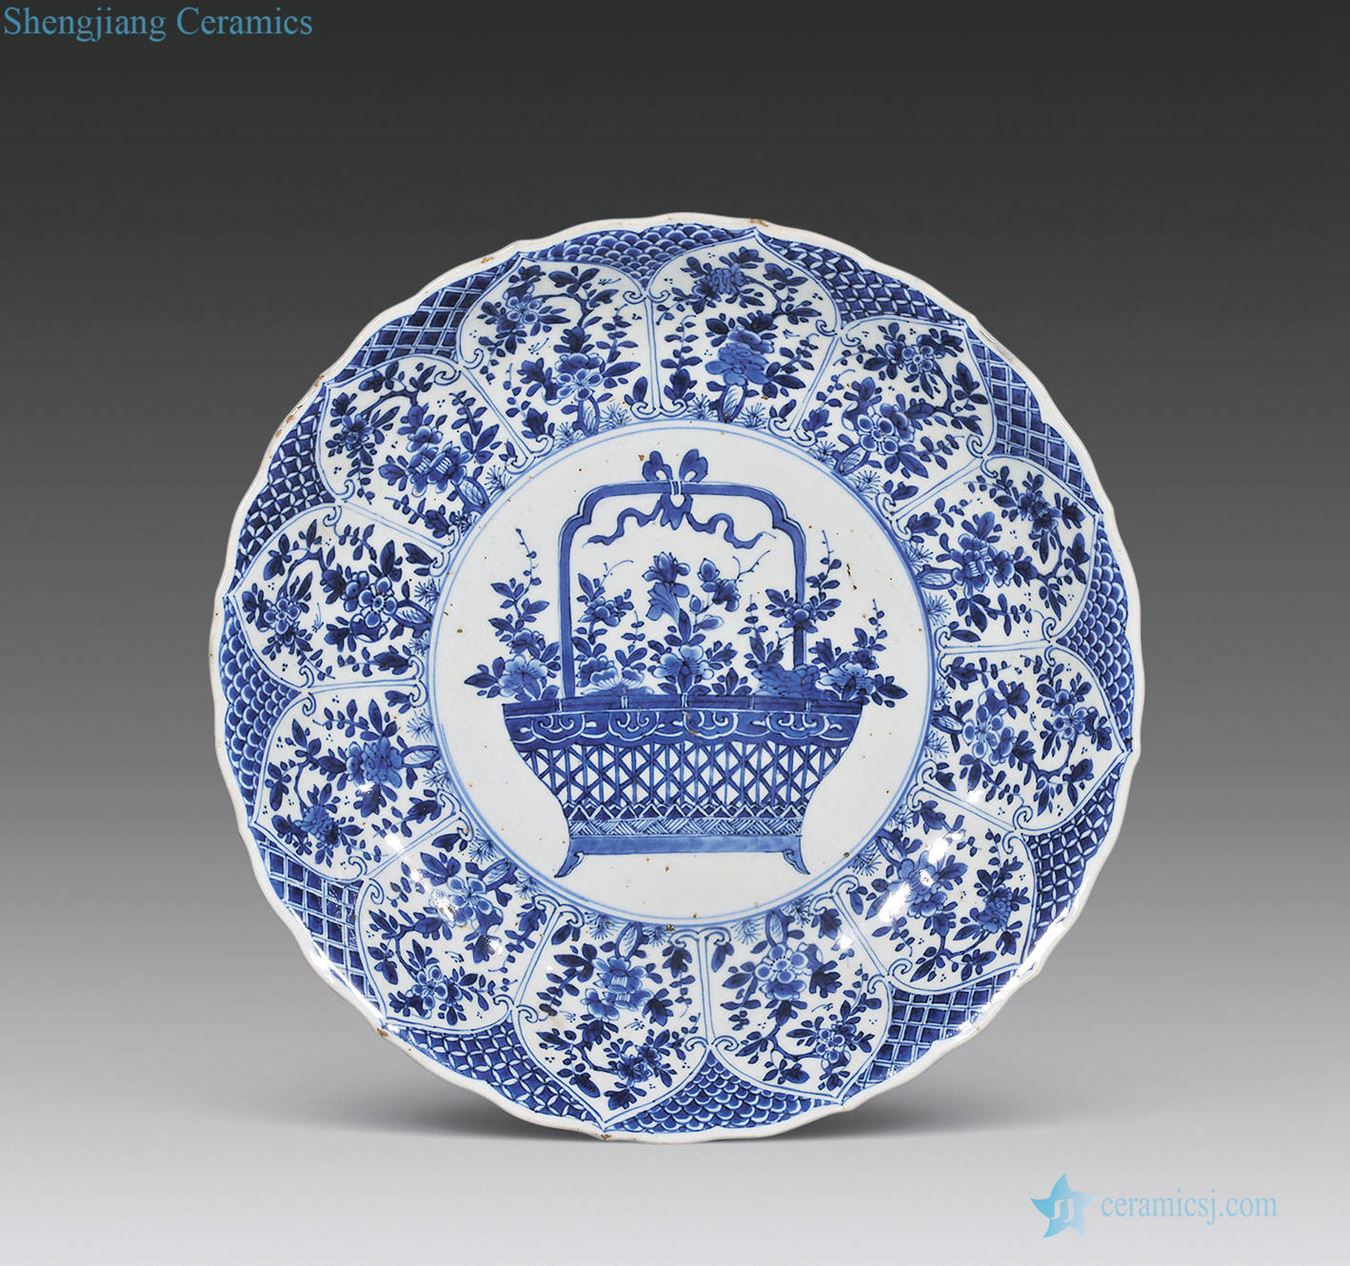 The qing emperor kangxi Blue and white flower basket grain lotus-shaped the broader market